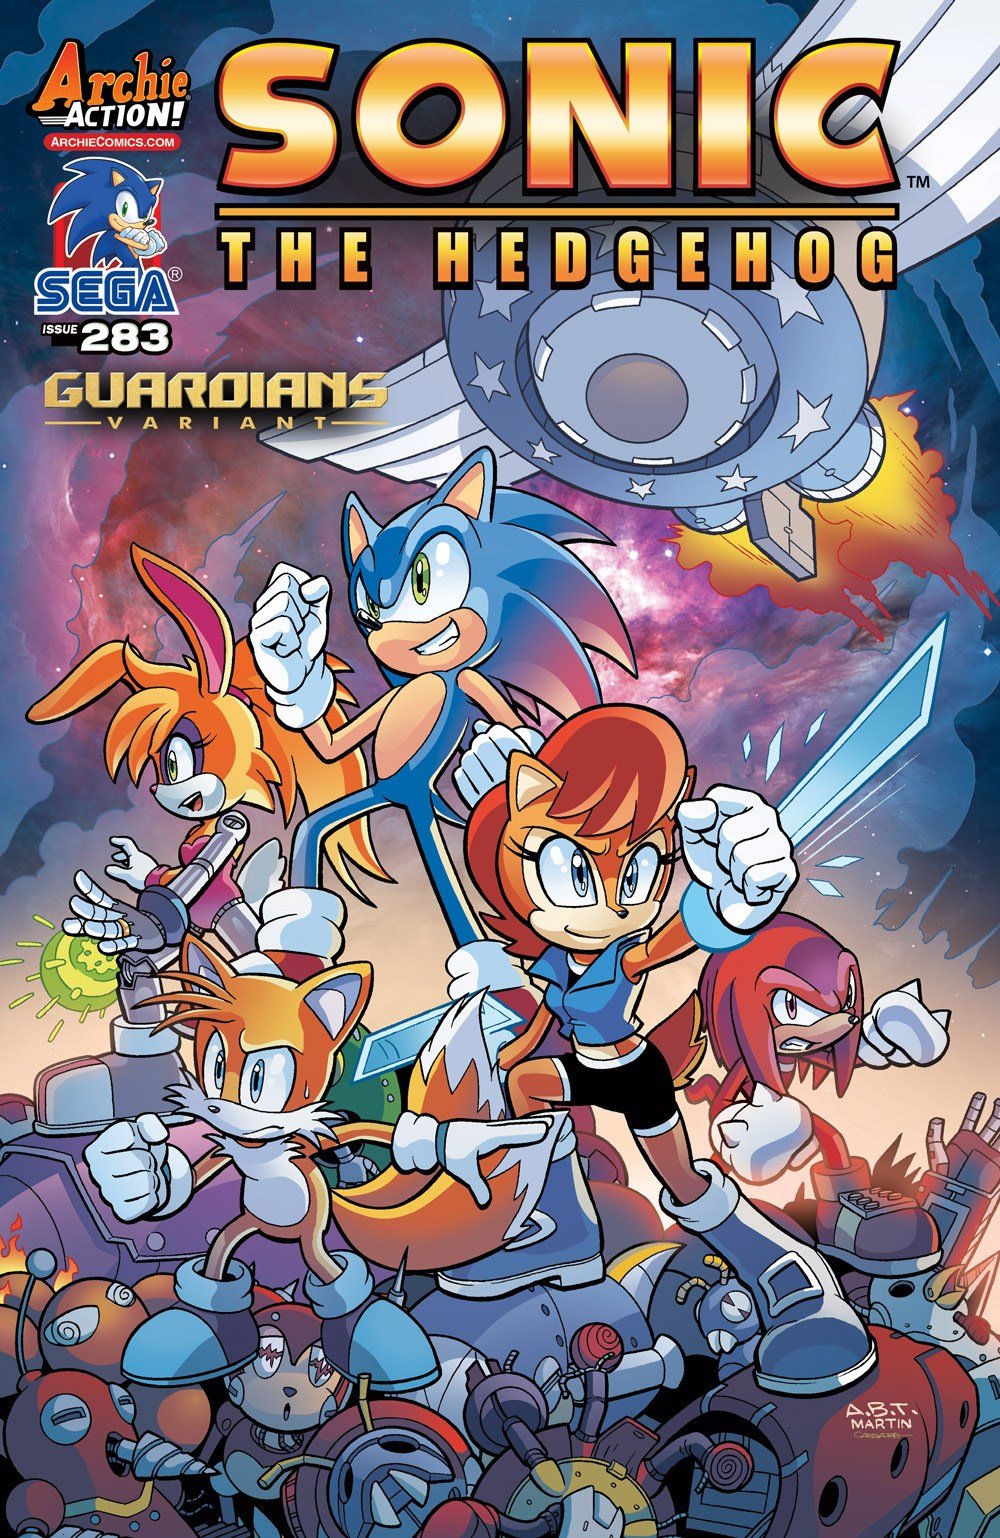 Sonic the Hedgehog 283 (August 2016) (variant edition)